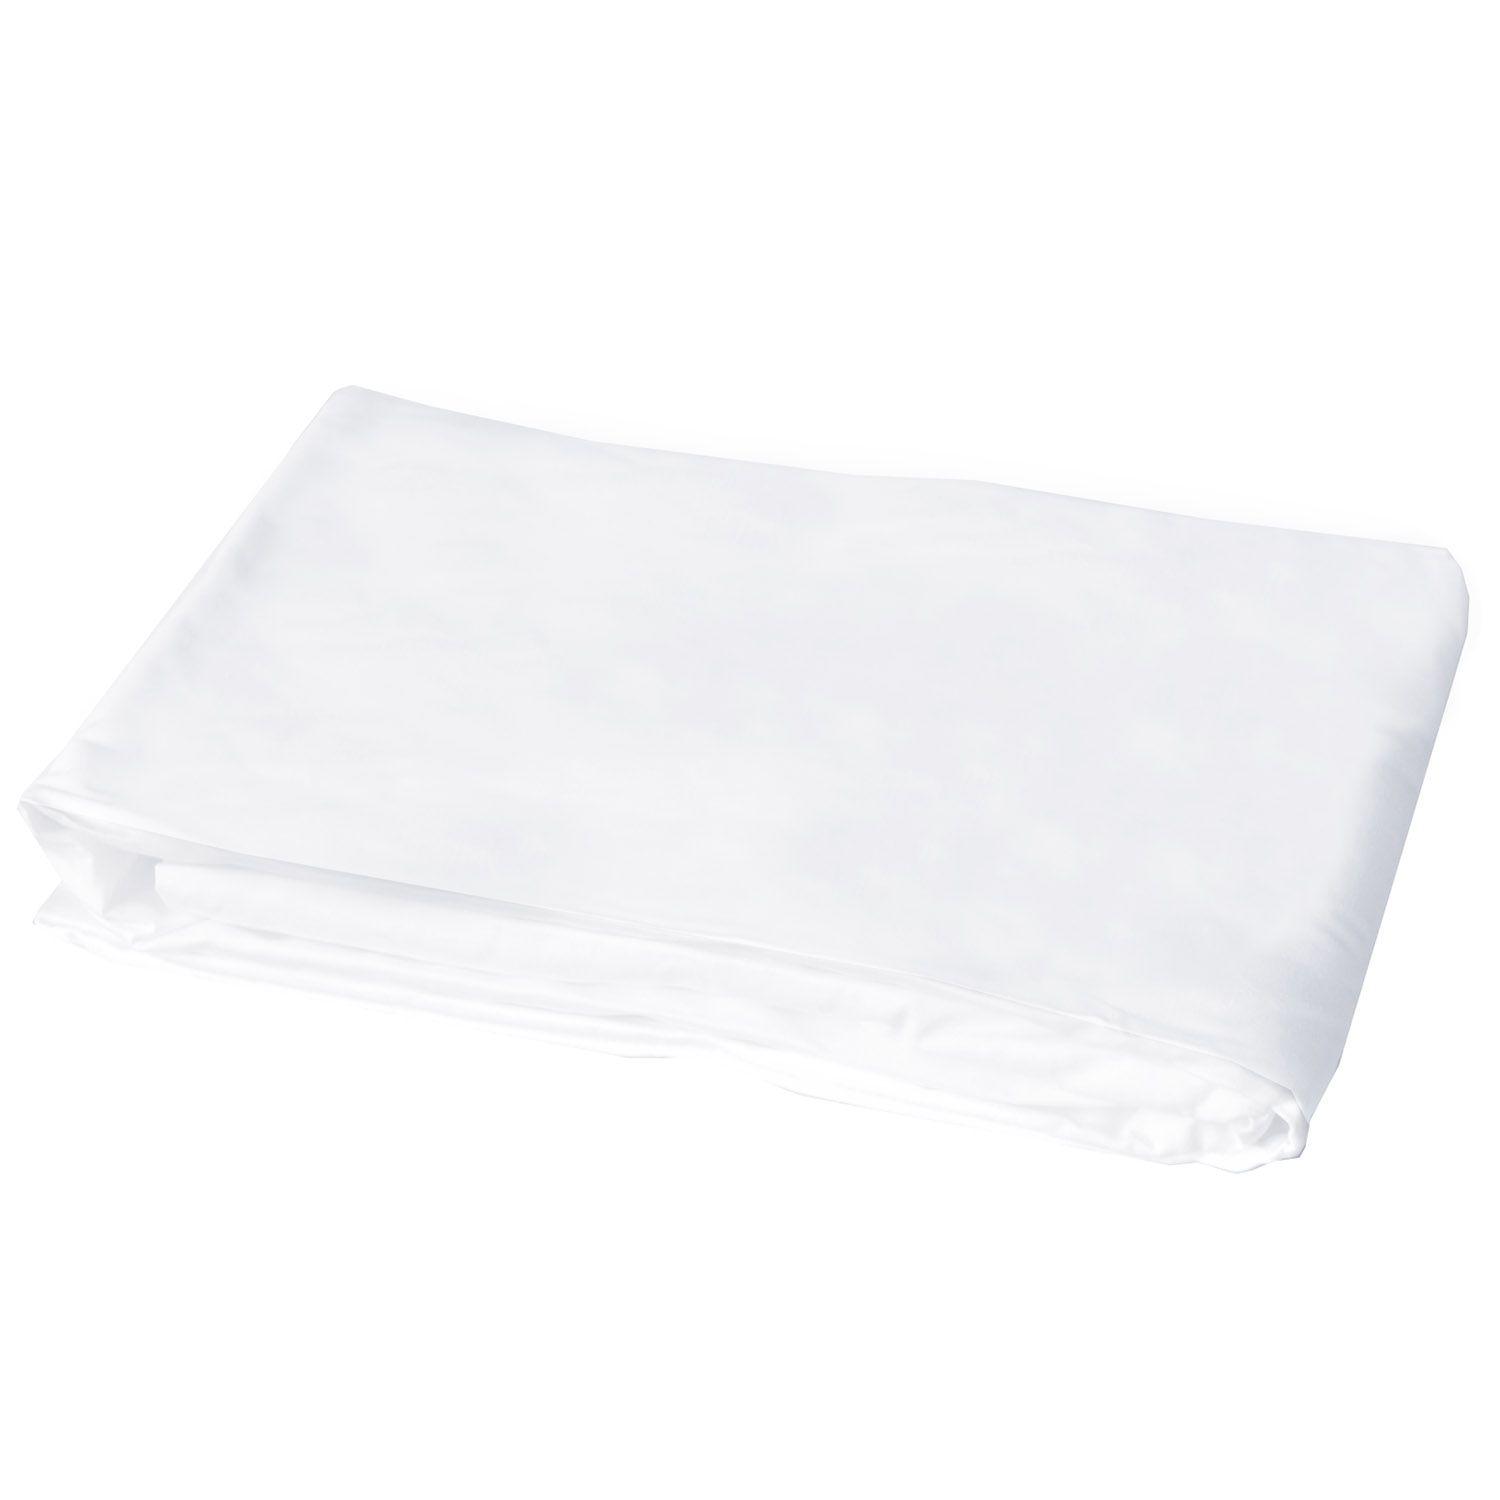 Bed Sheet 180x200 cm Fitted Sheet 100% Cotton White